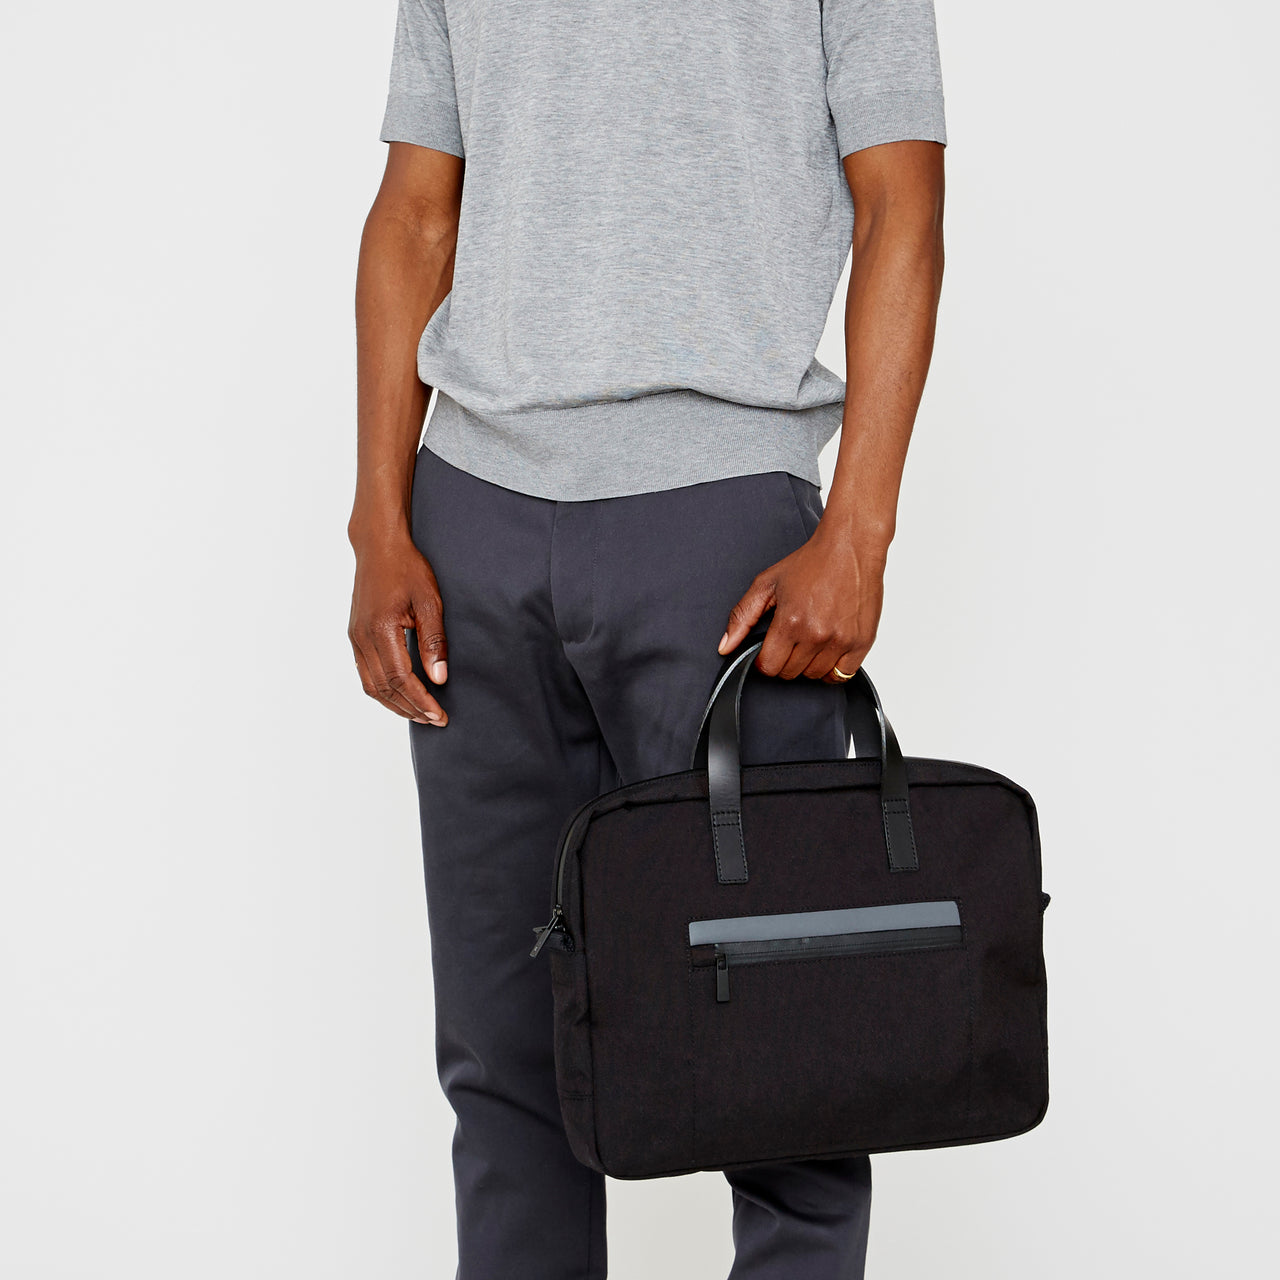 Mansell Travel and Cycle Briefcase in Grey